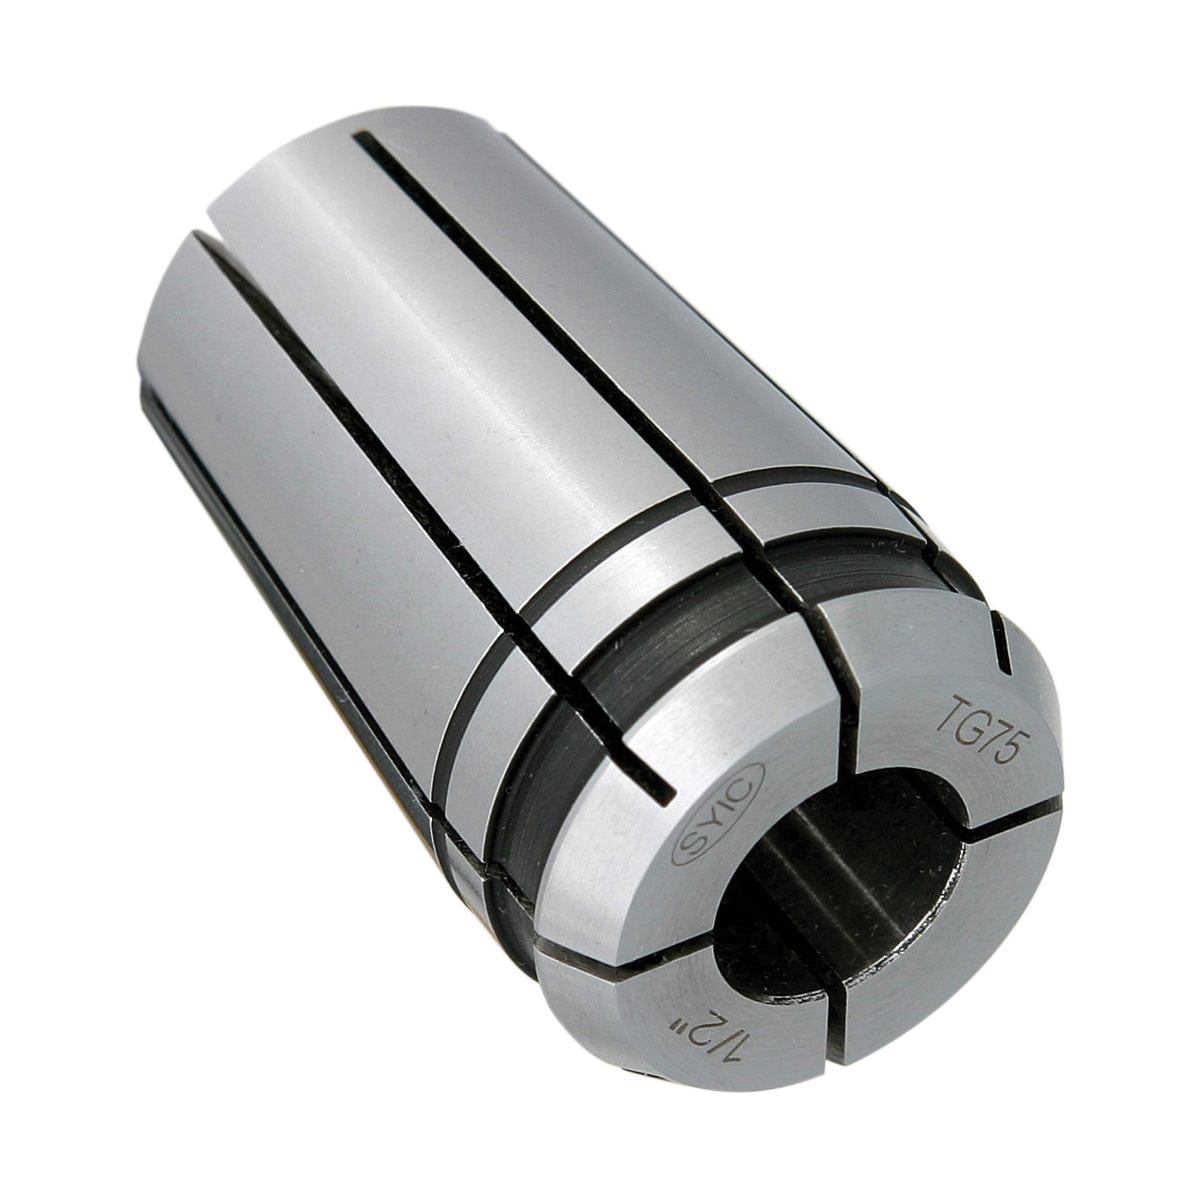 TG75 19/32" COLLET